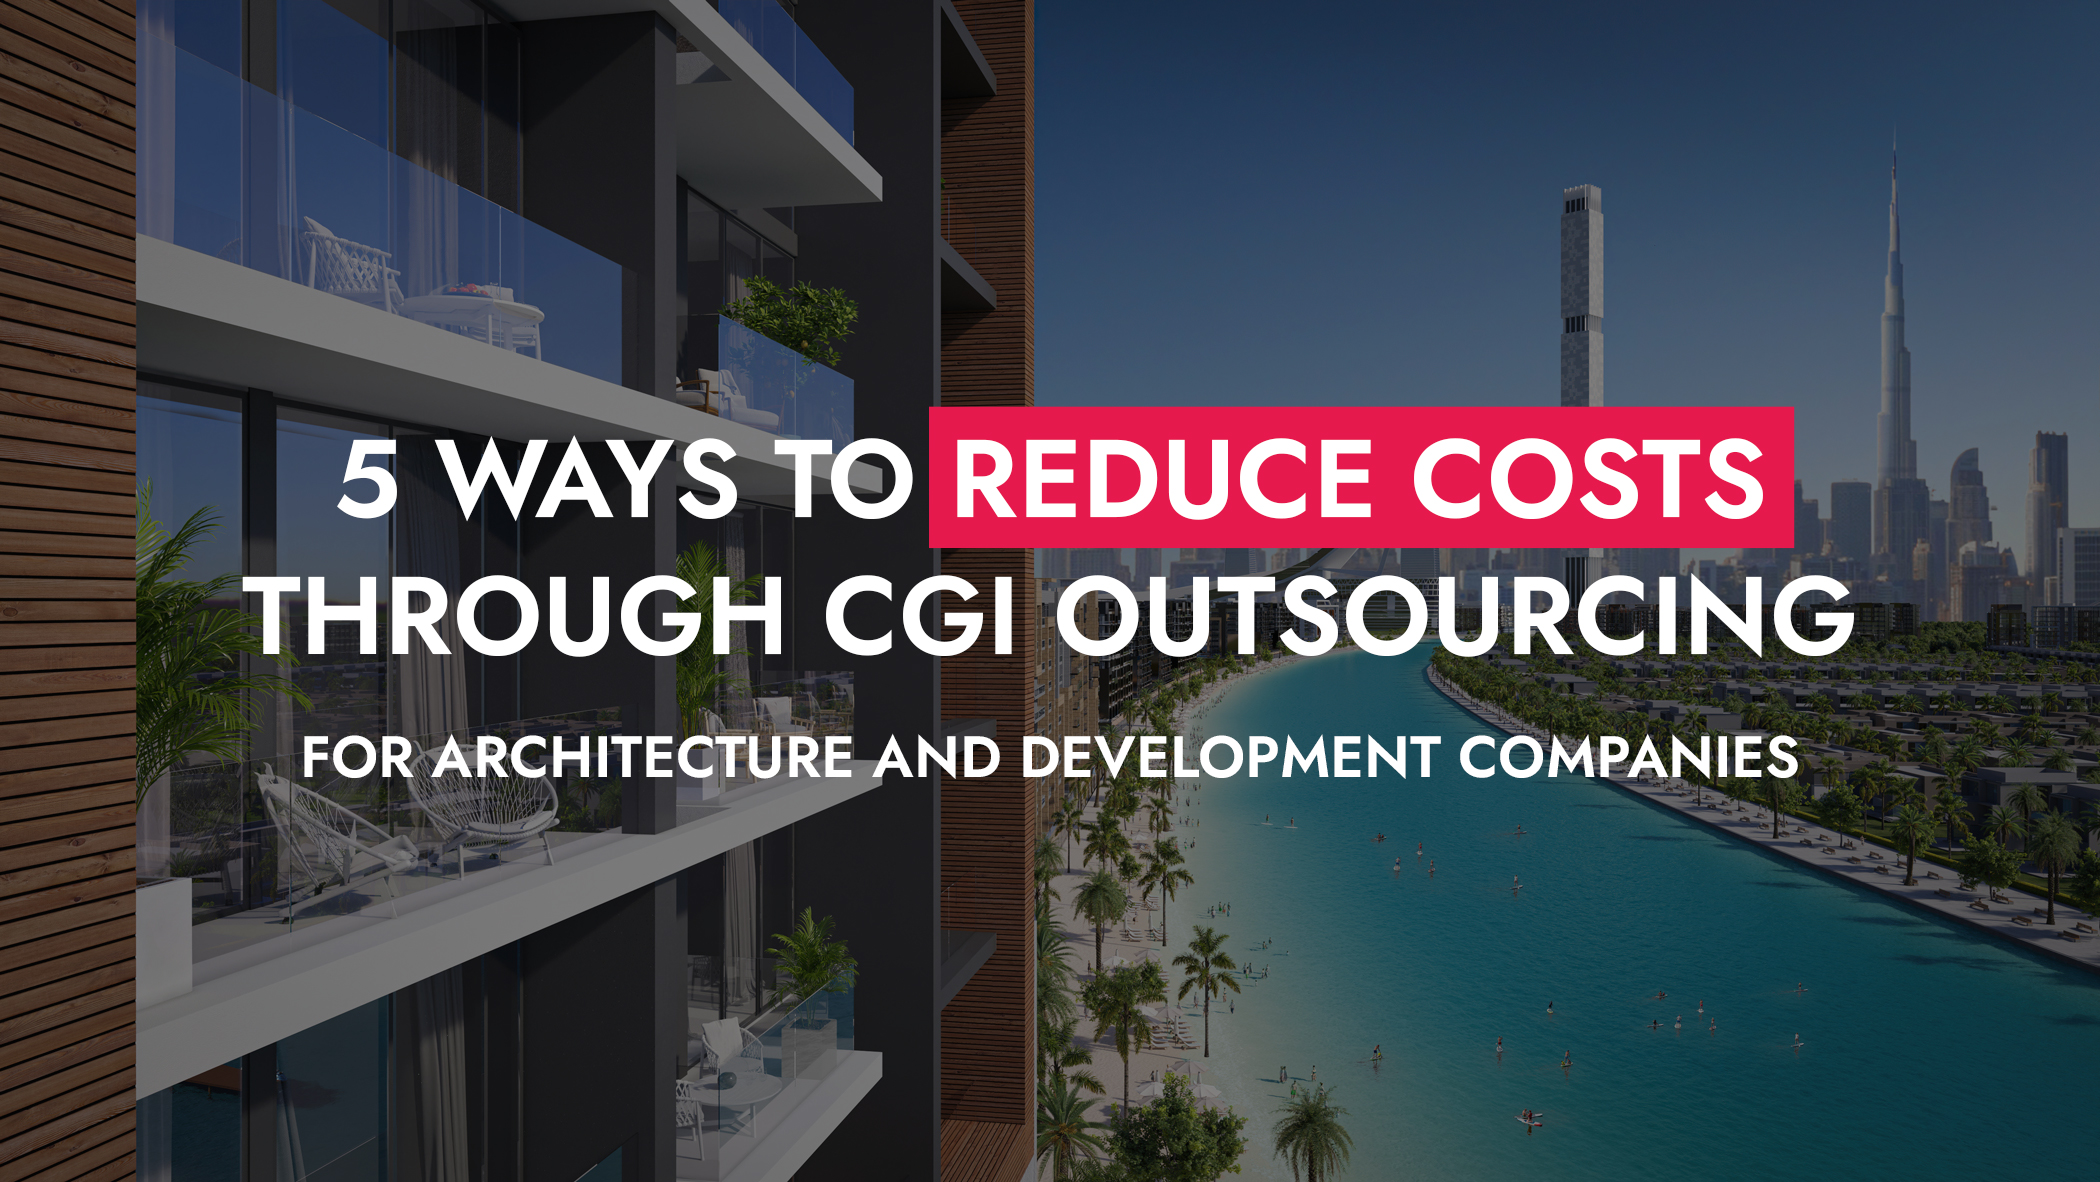 005 04 23 5 Ways To Reduce Costs Through CGI Outsourcing